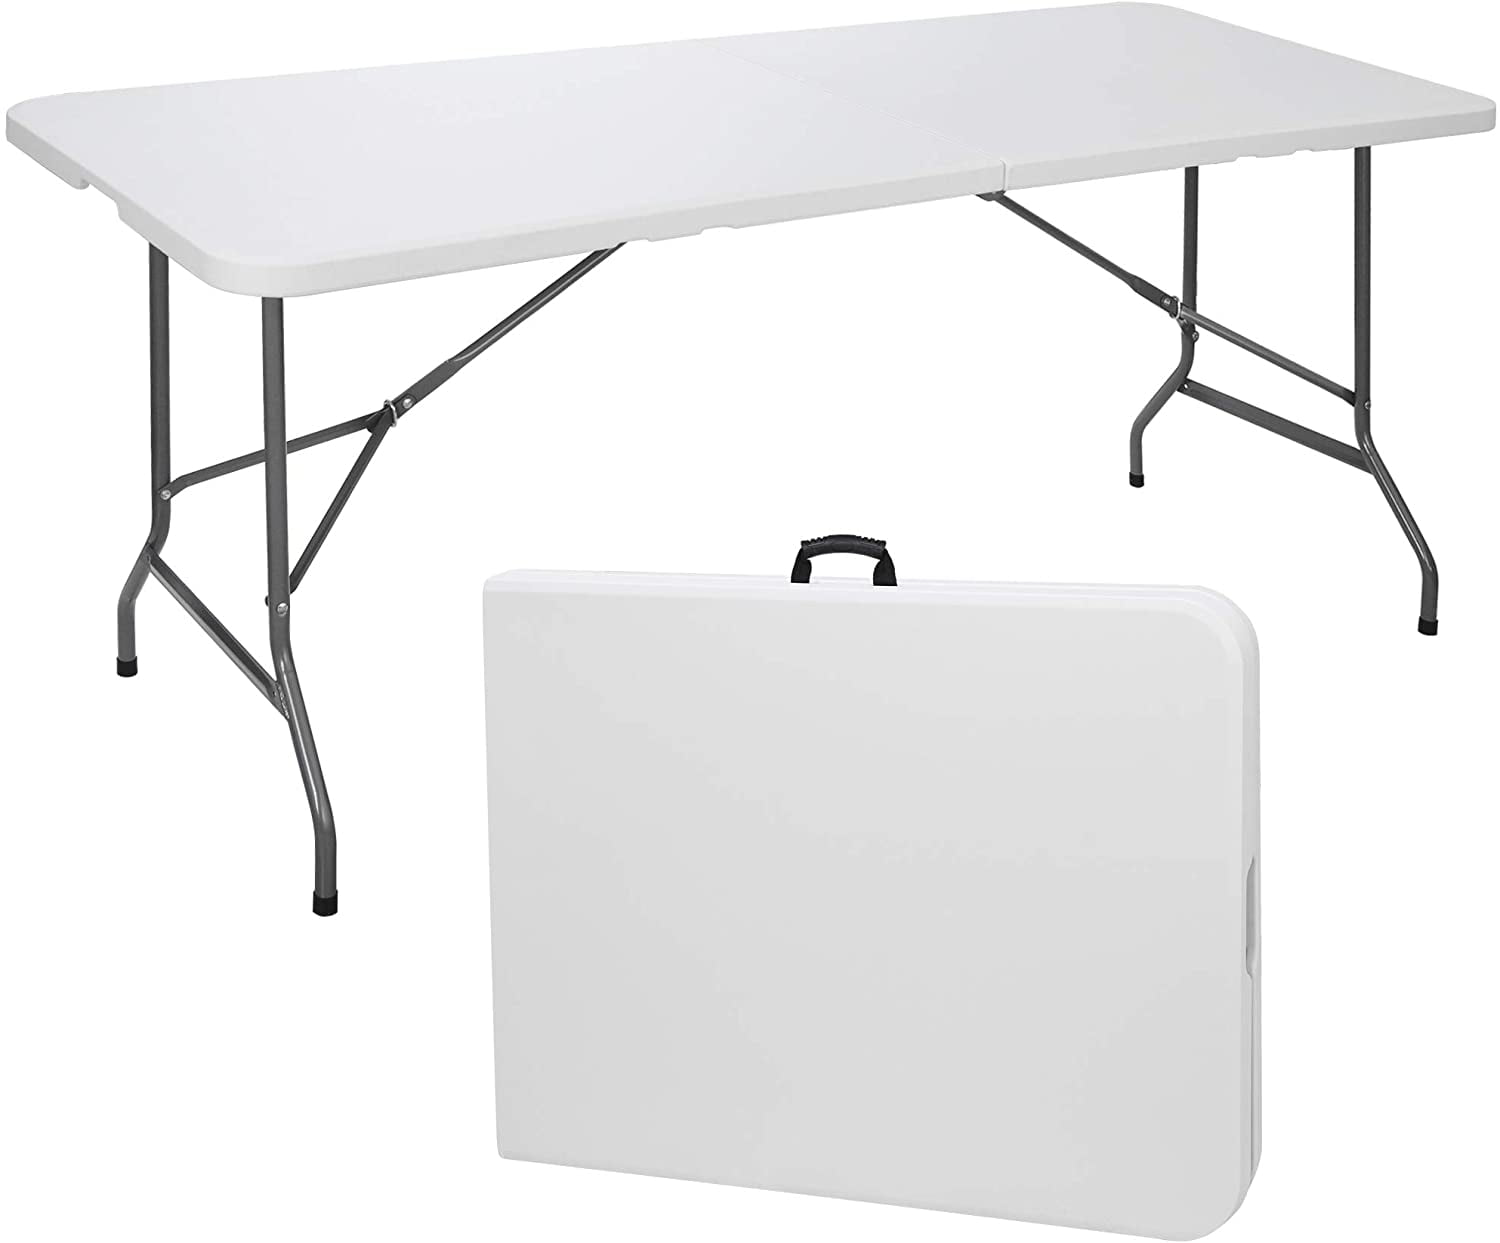 Details about   Portable Folding Table 6' Ft Centerfold White Indoor Outdoor Party Dining Sturdy 